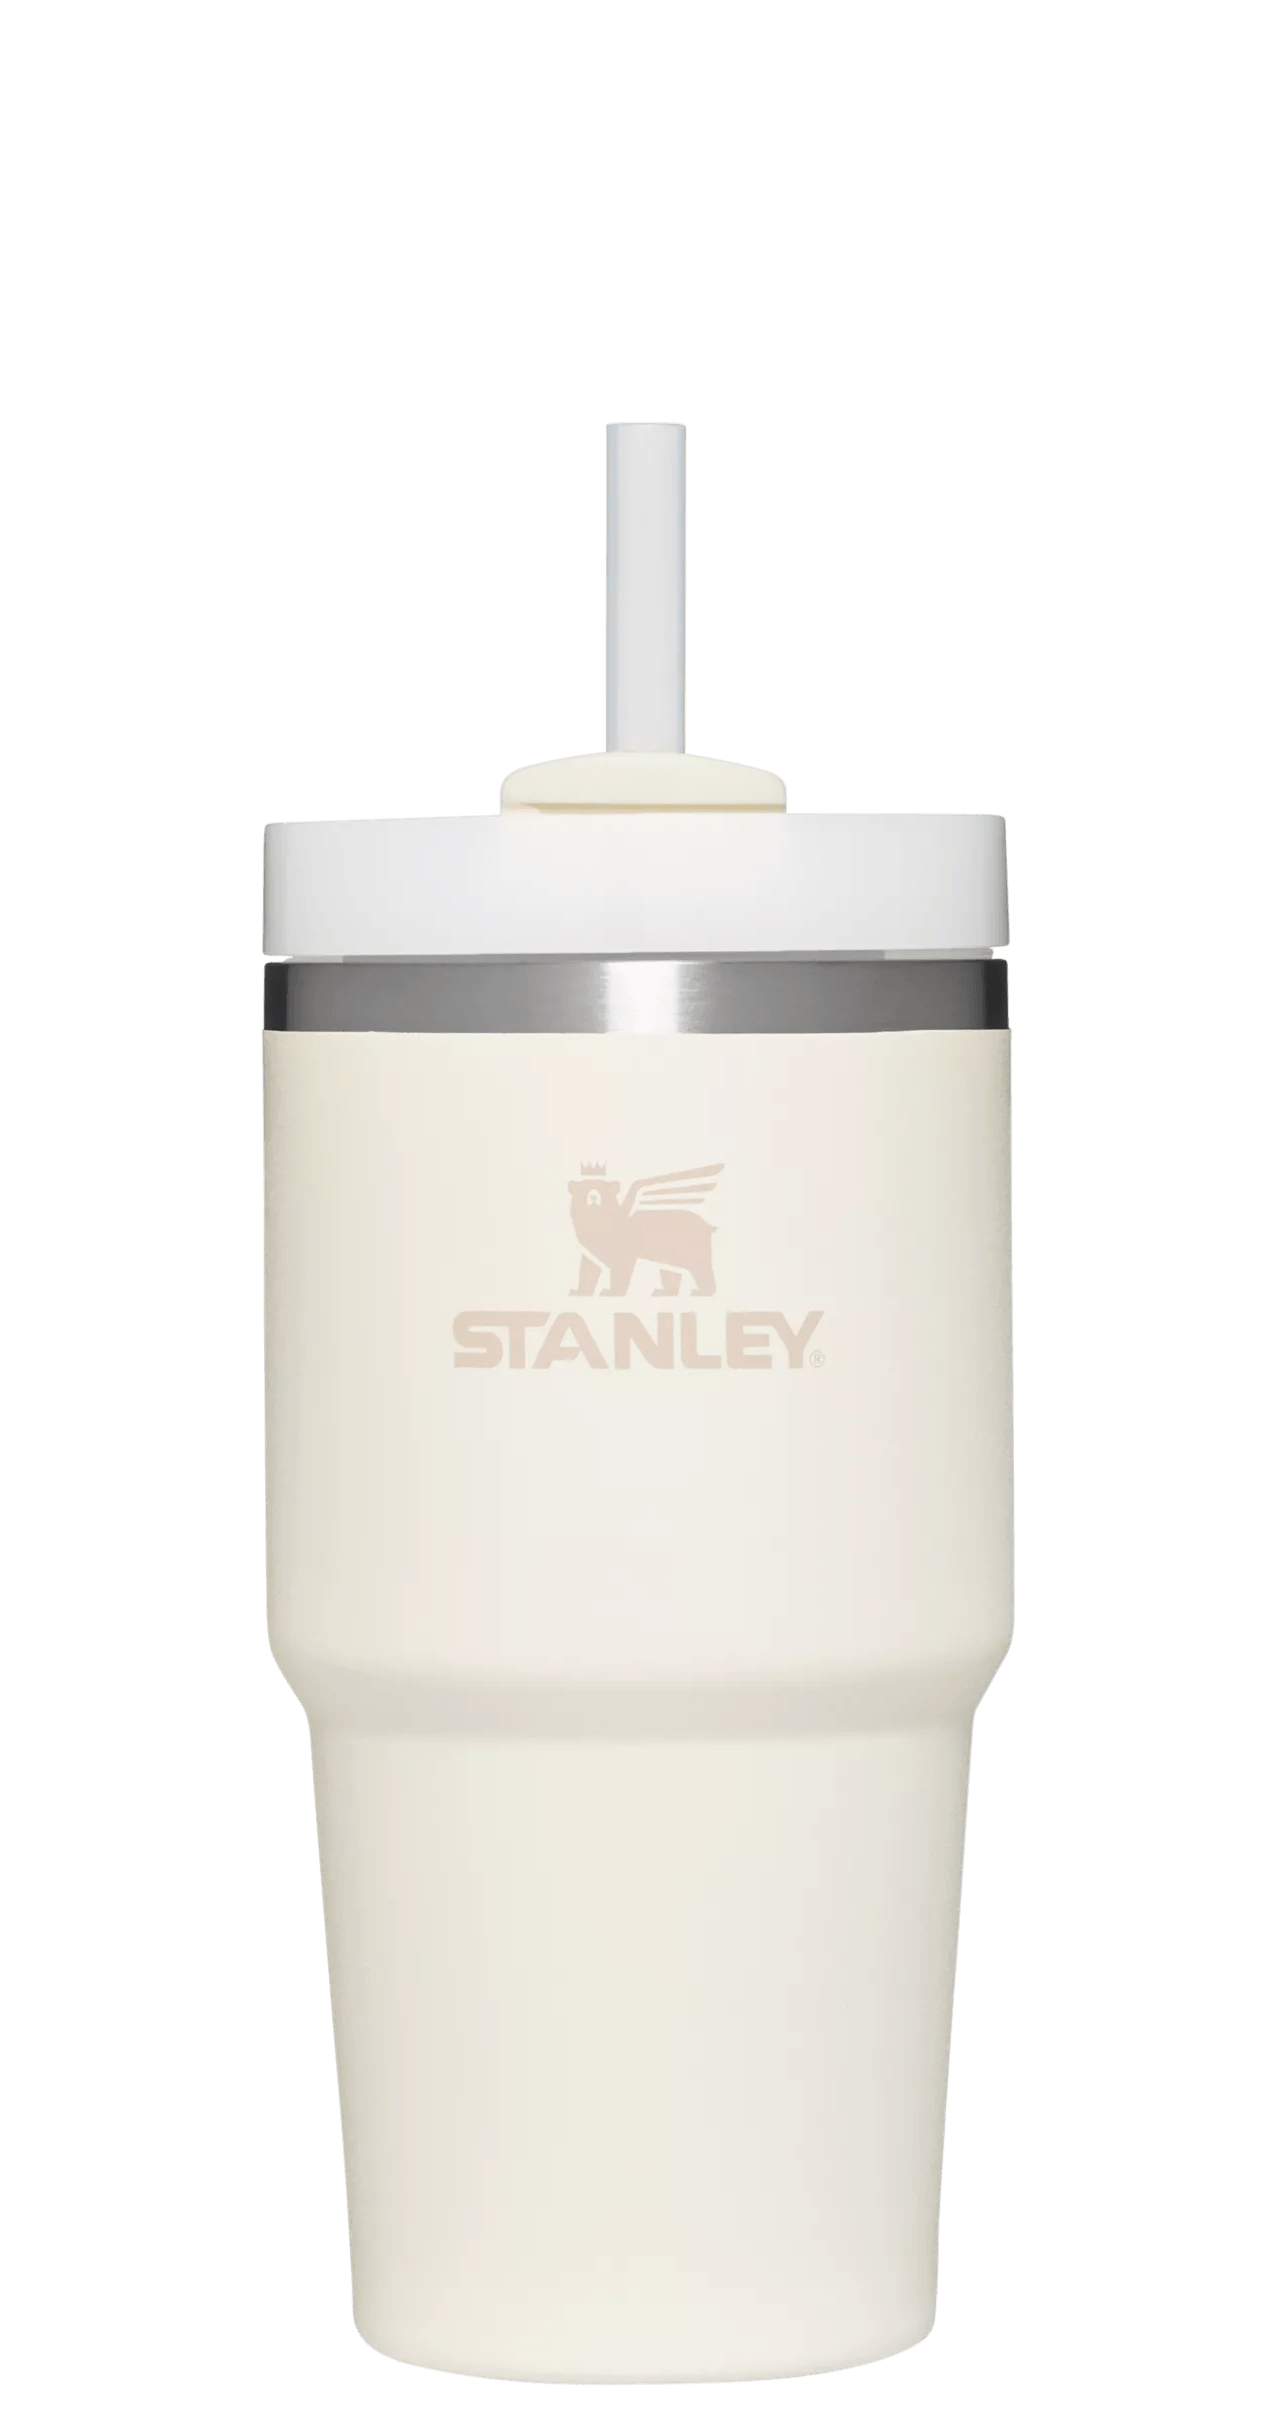 Stanley The Quencher H2.0 Flowstate Tumbler 20 oz